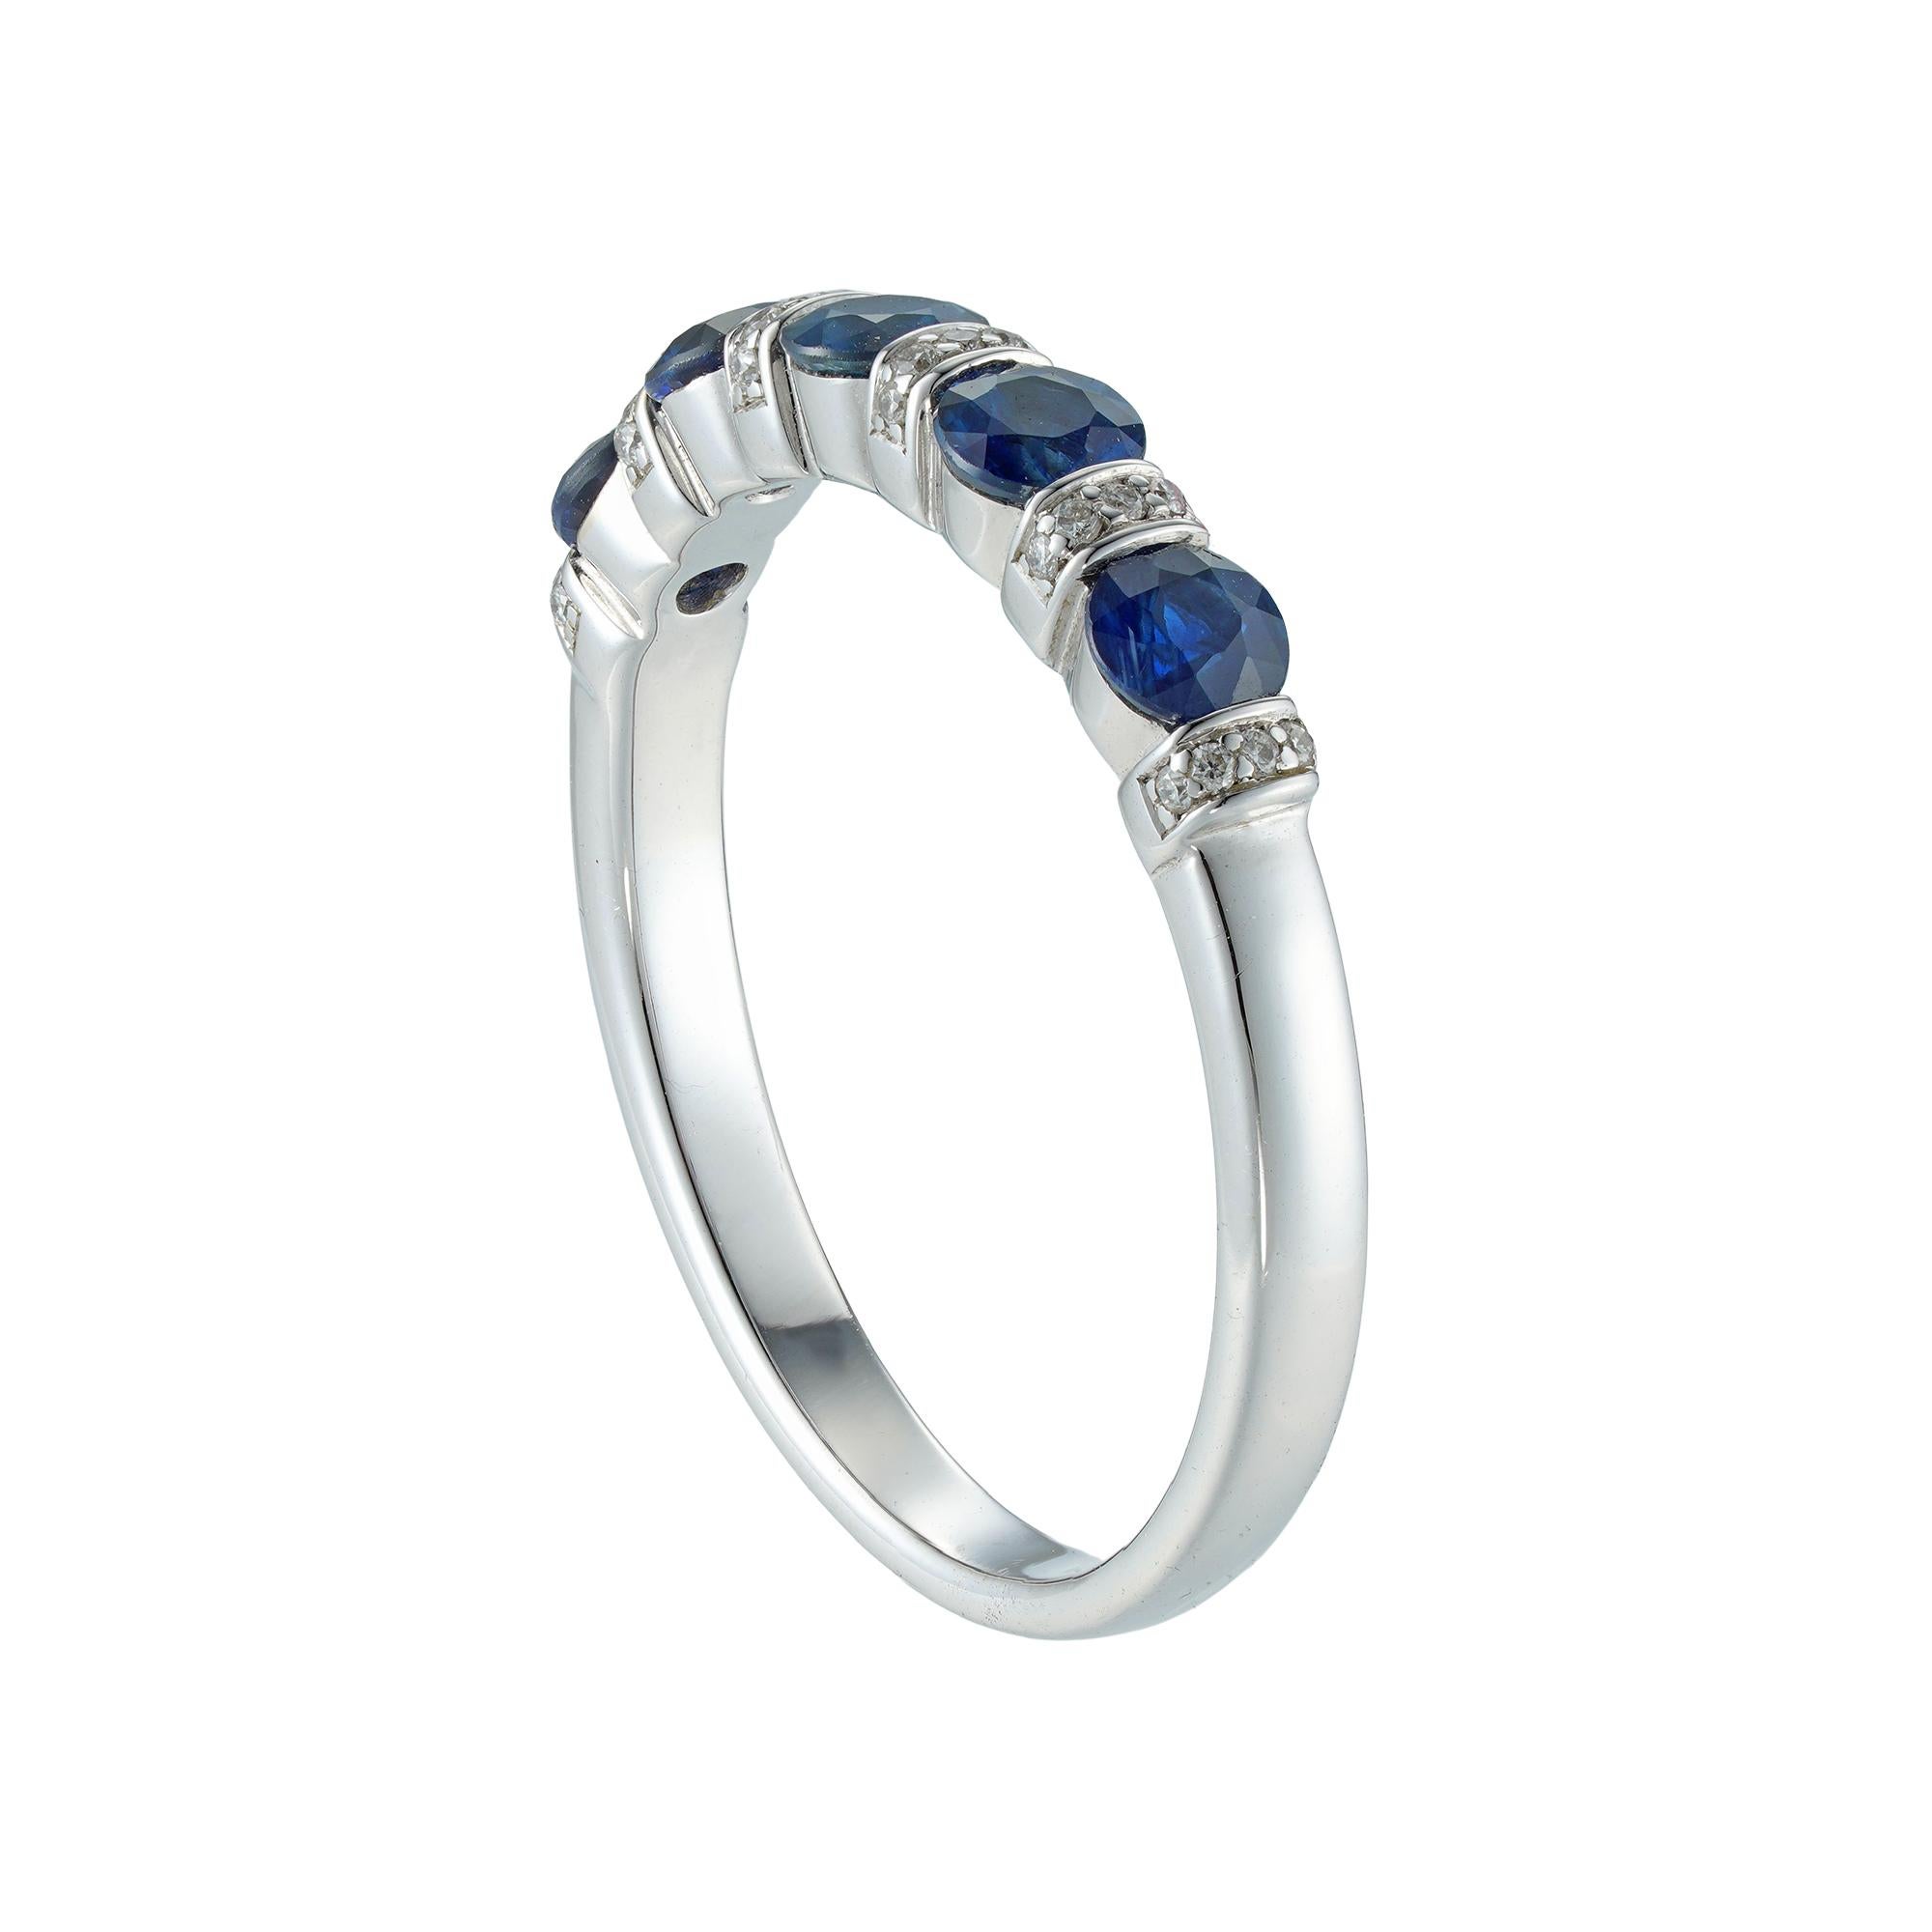 A sapphire and diamond half eternity ring, consisting of five round brilliant-cut sapphires weighing 0.77 carats in total, tension-set between six round- brilliant-cut diamond-set sections, the diamonds weighing 0.06 carats in total, all mounted in